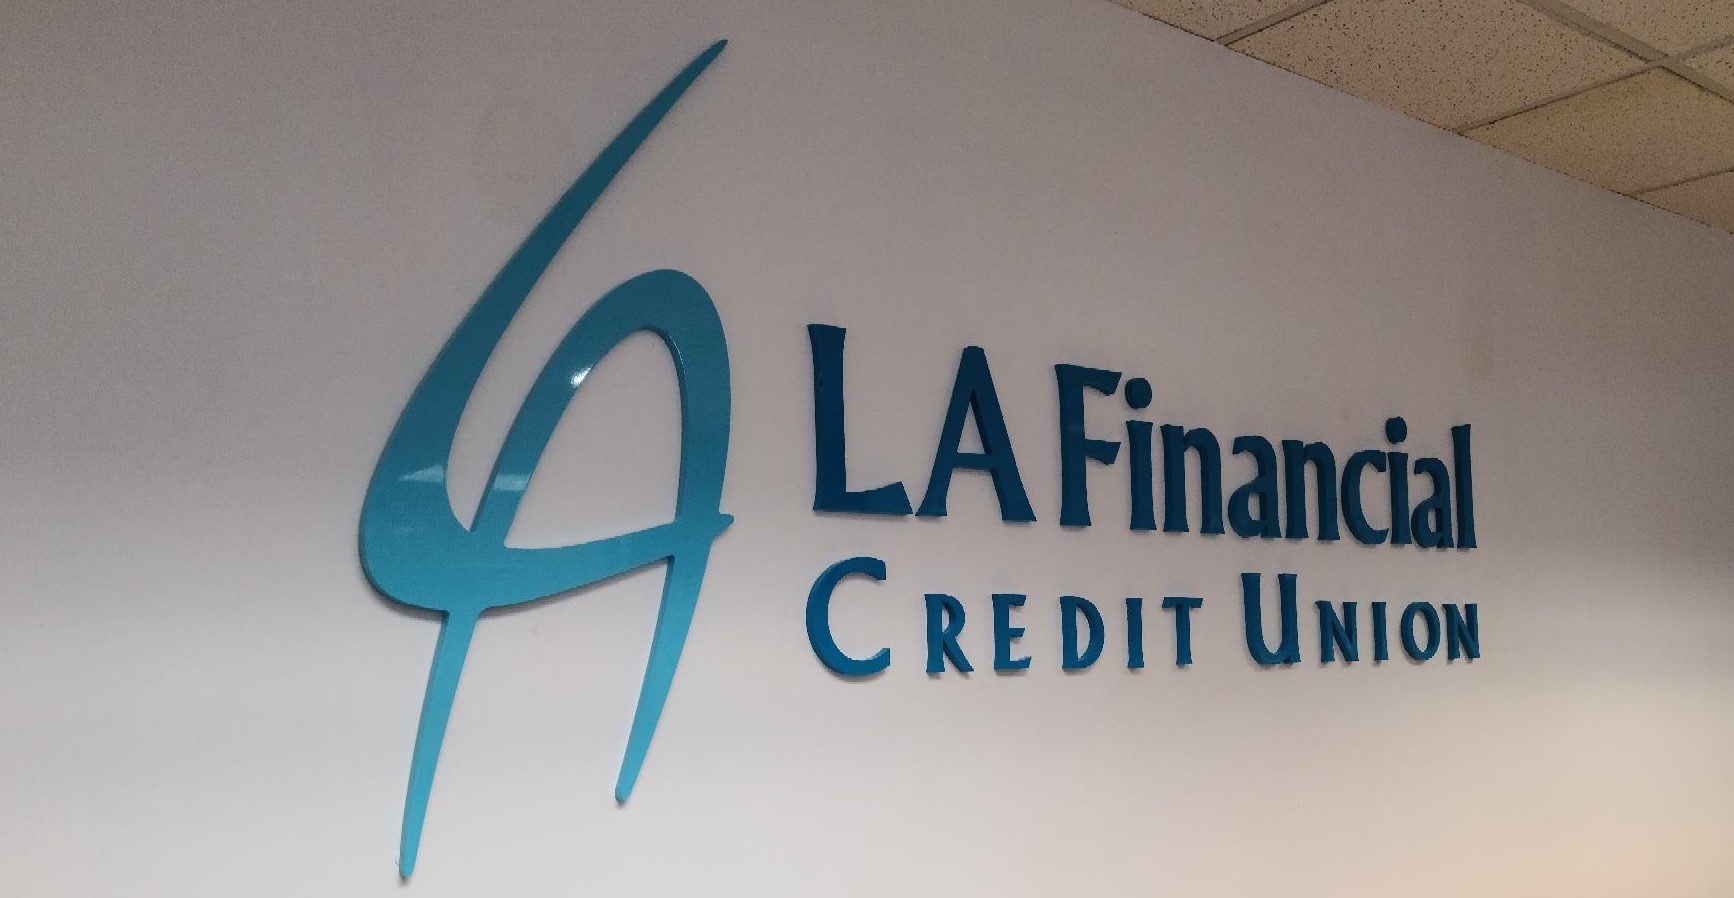 More for our office sign package for LA Financial Credit Union's Pasadena location. This dimensional lobby sign serves as a centerpiece for the workplace.